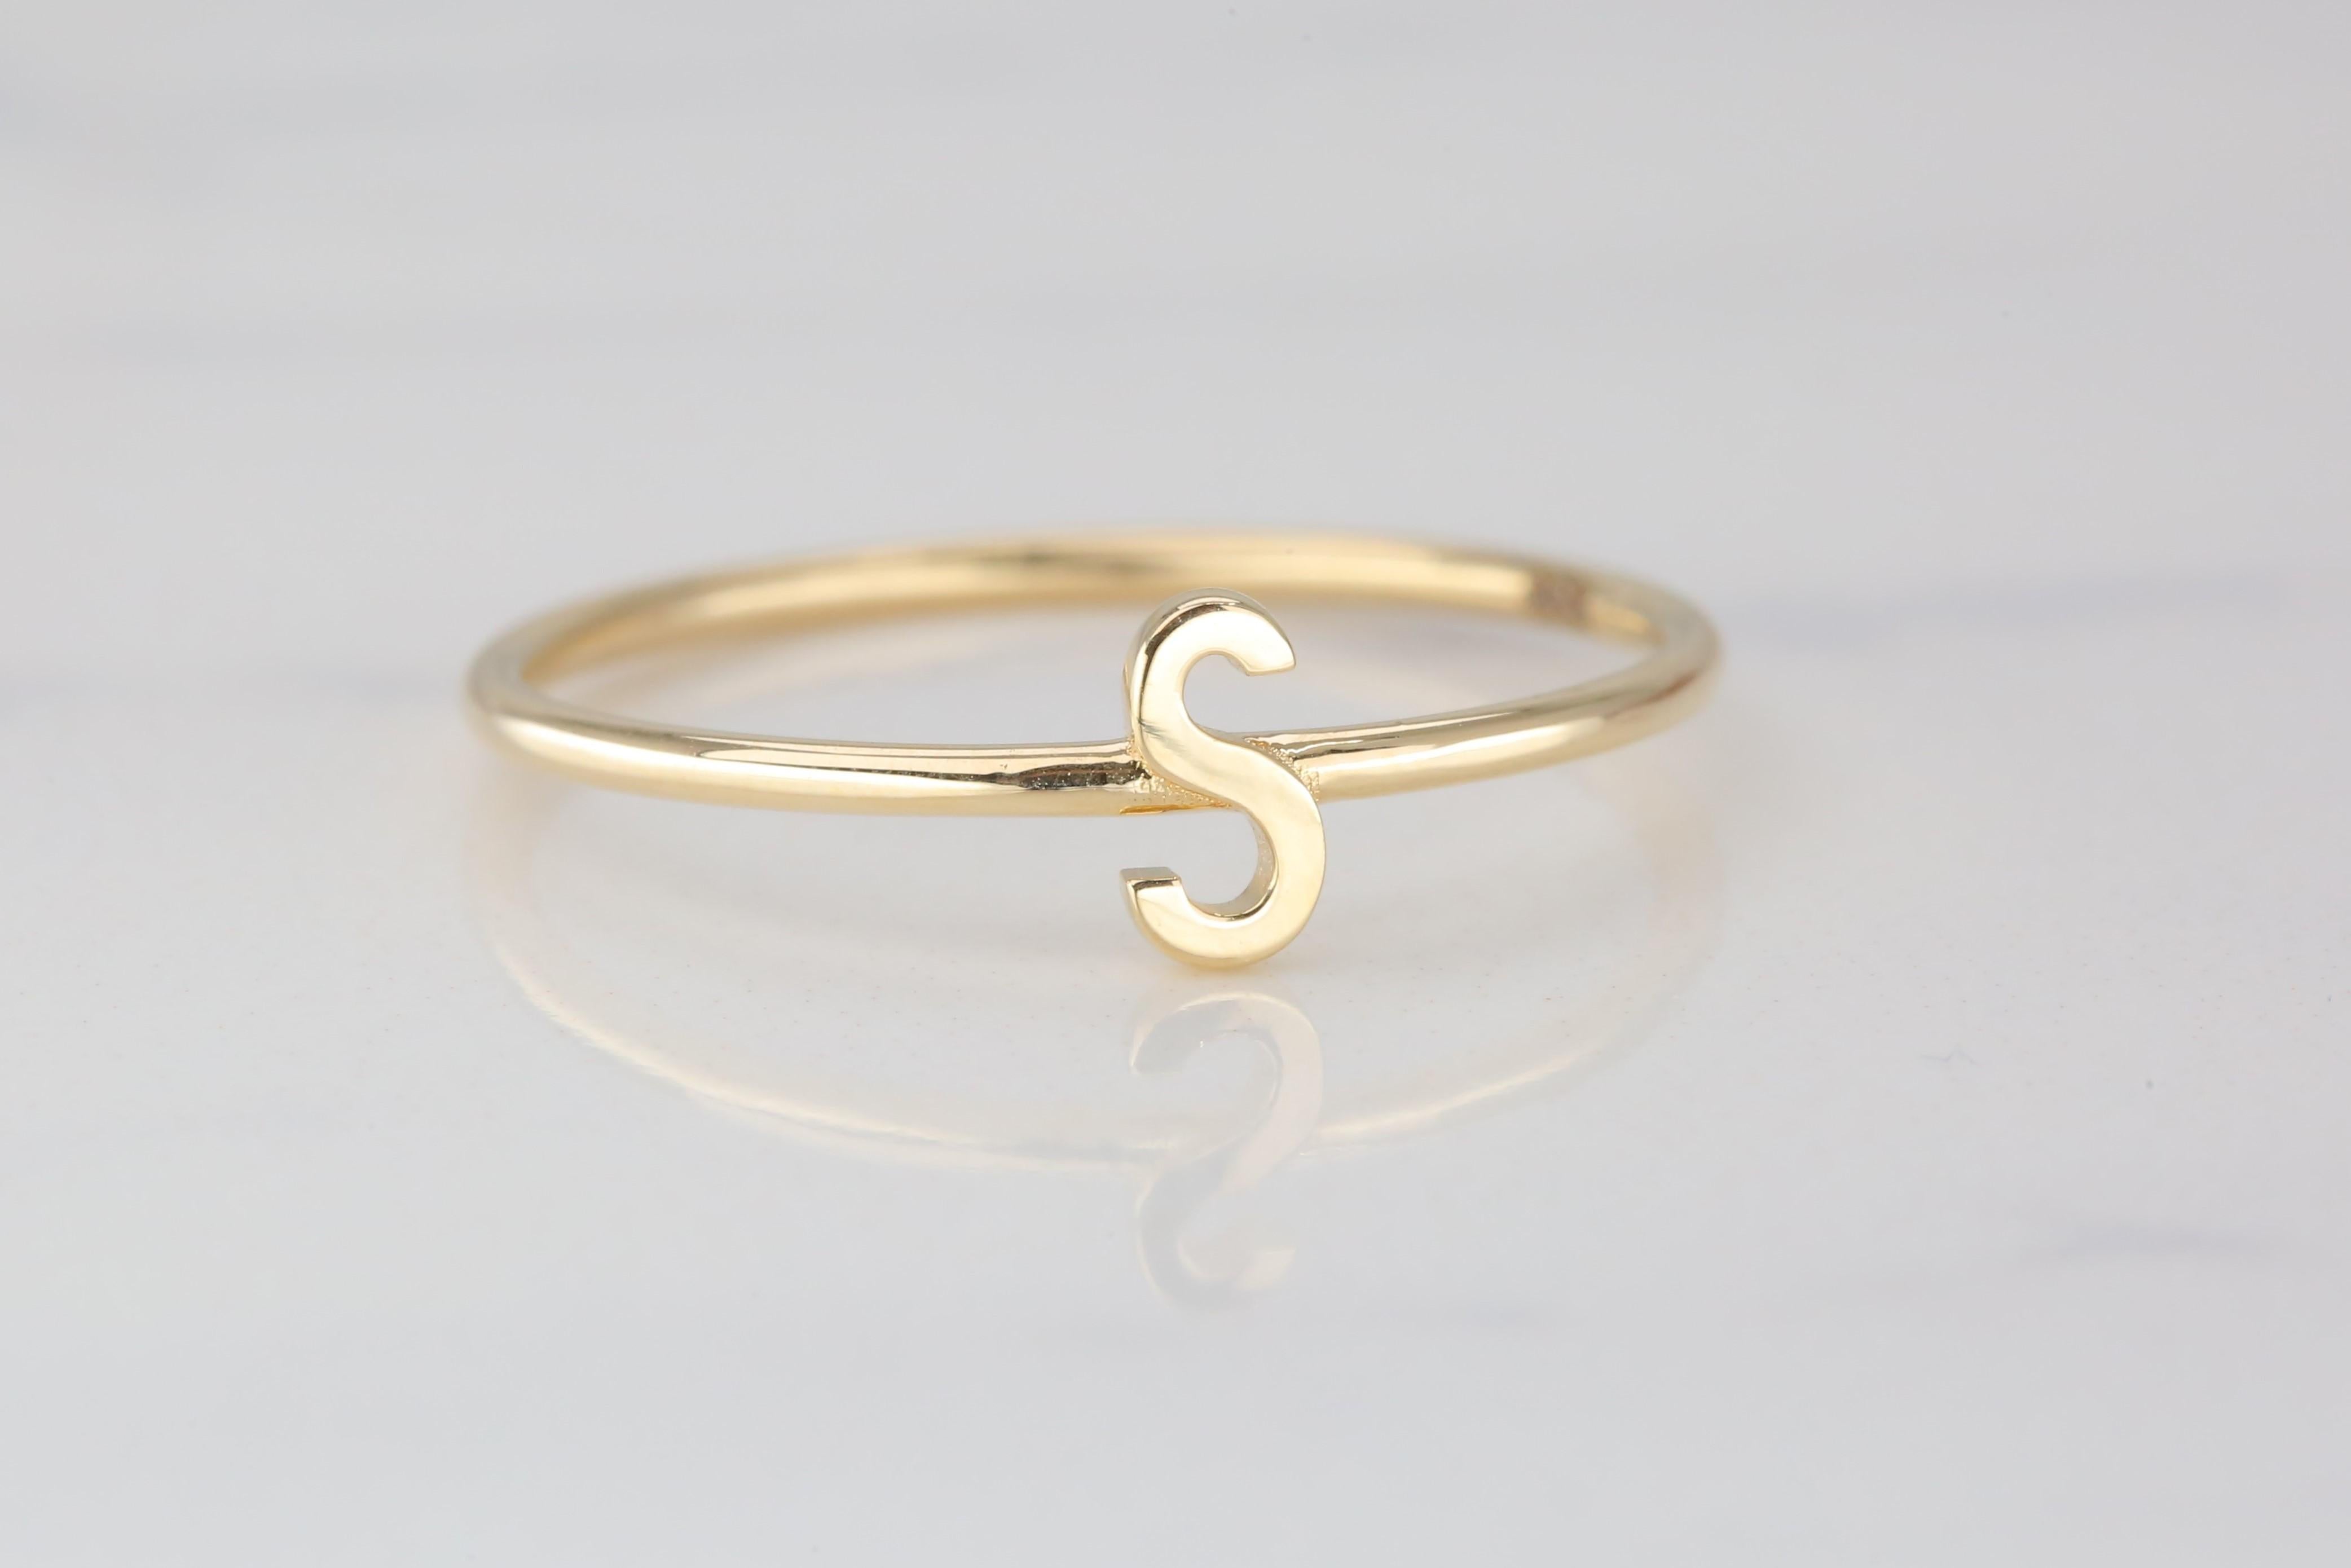 For Sale:  14K Gold Initial S Letter Ring, Personalized Initial Letter Ring 3